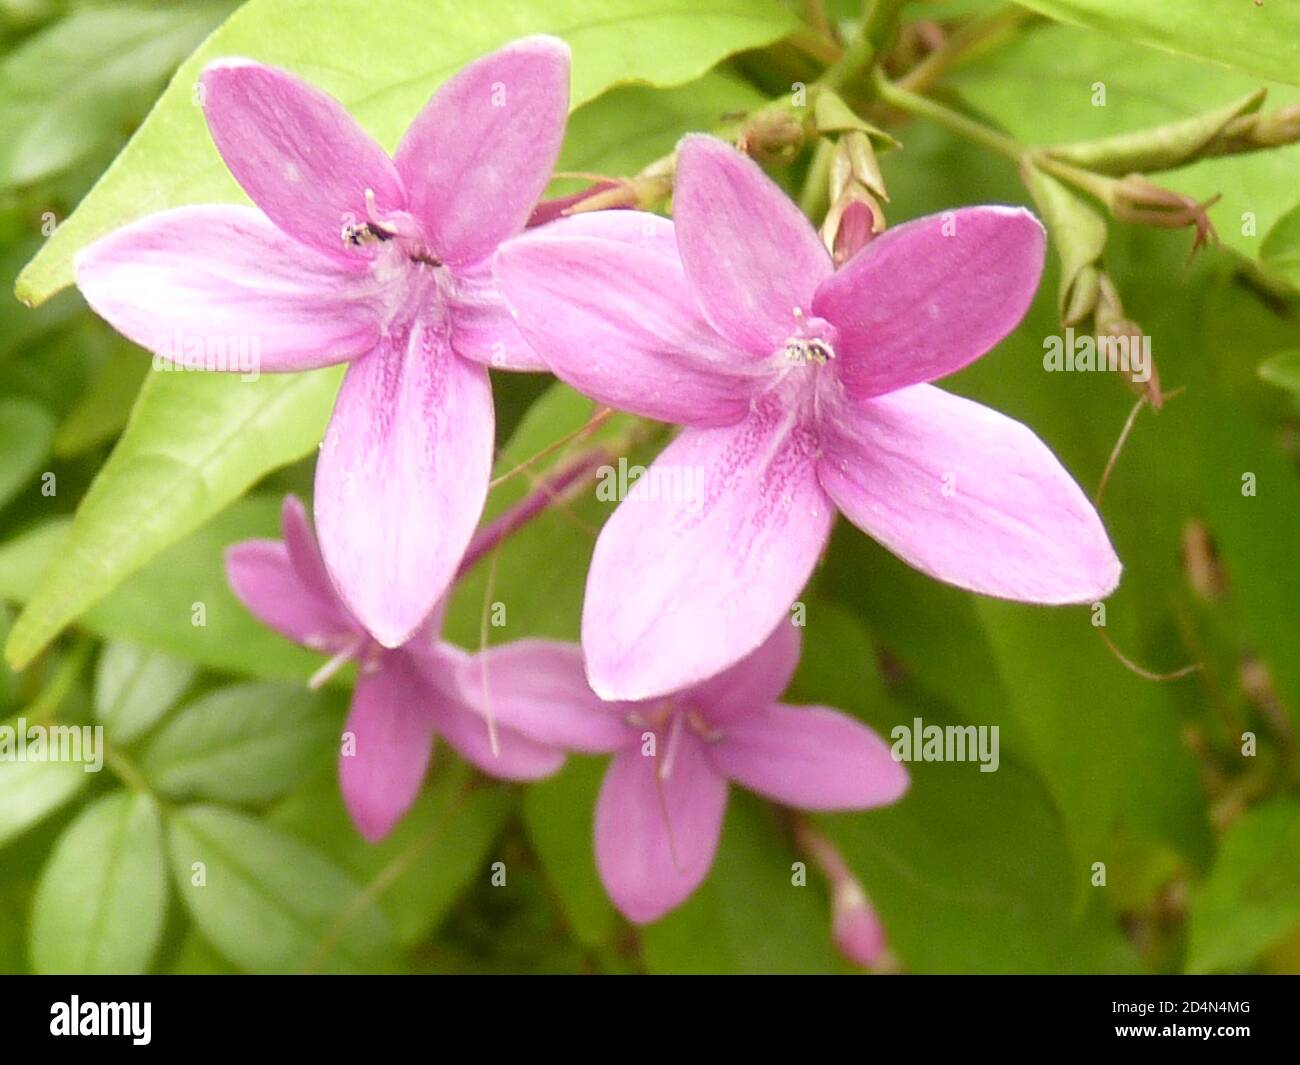 Closeup of Purple Dazzler flowers on the blurred background Stock Photo